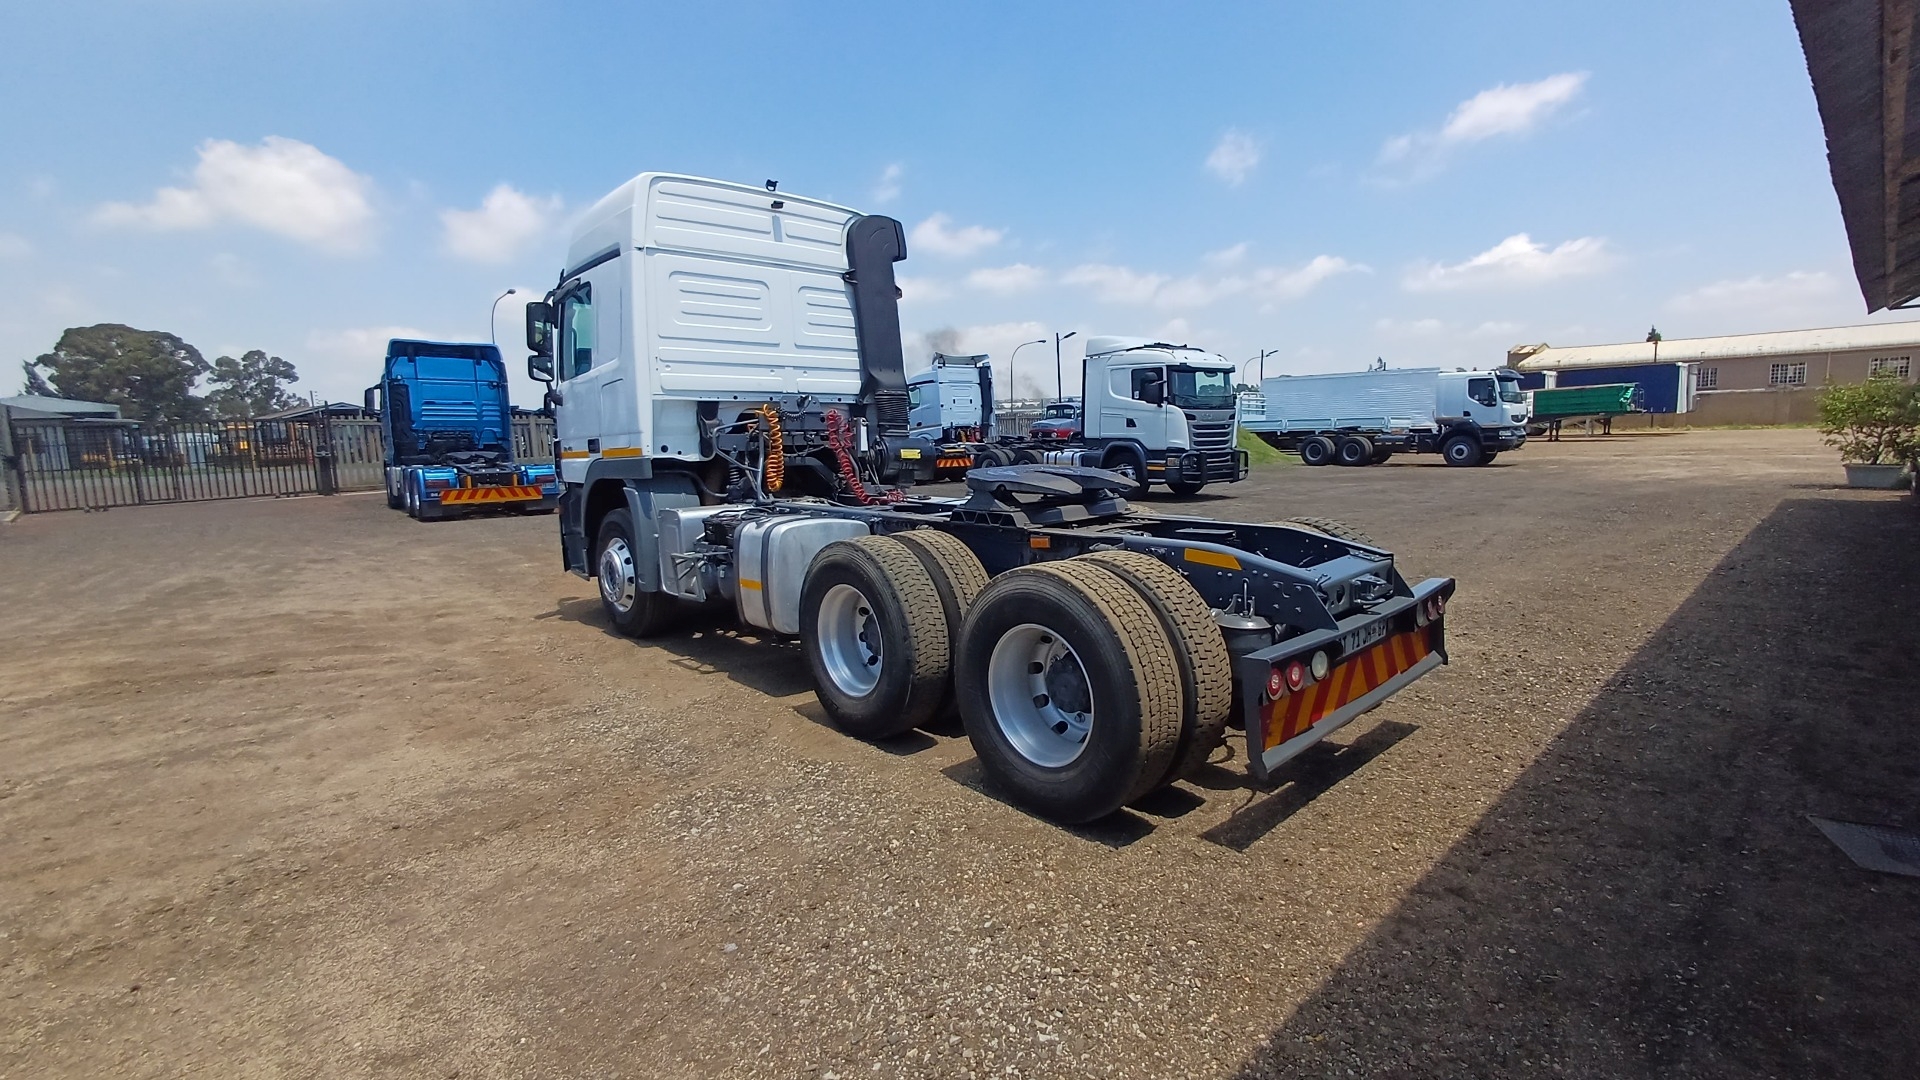 Mercedes Benz Truck tractors Double axle 2016 MB ACTROS 2646 6X4 TT 2016 for sale by A2Z Trucks | Truck & Trailer Marketplace